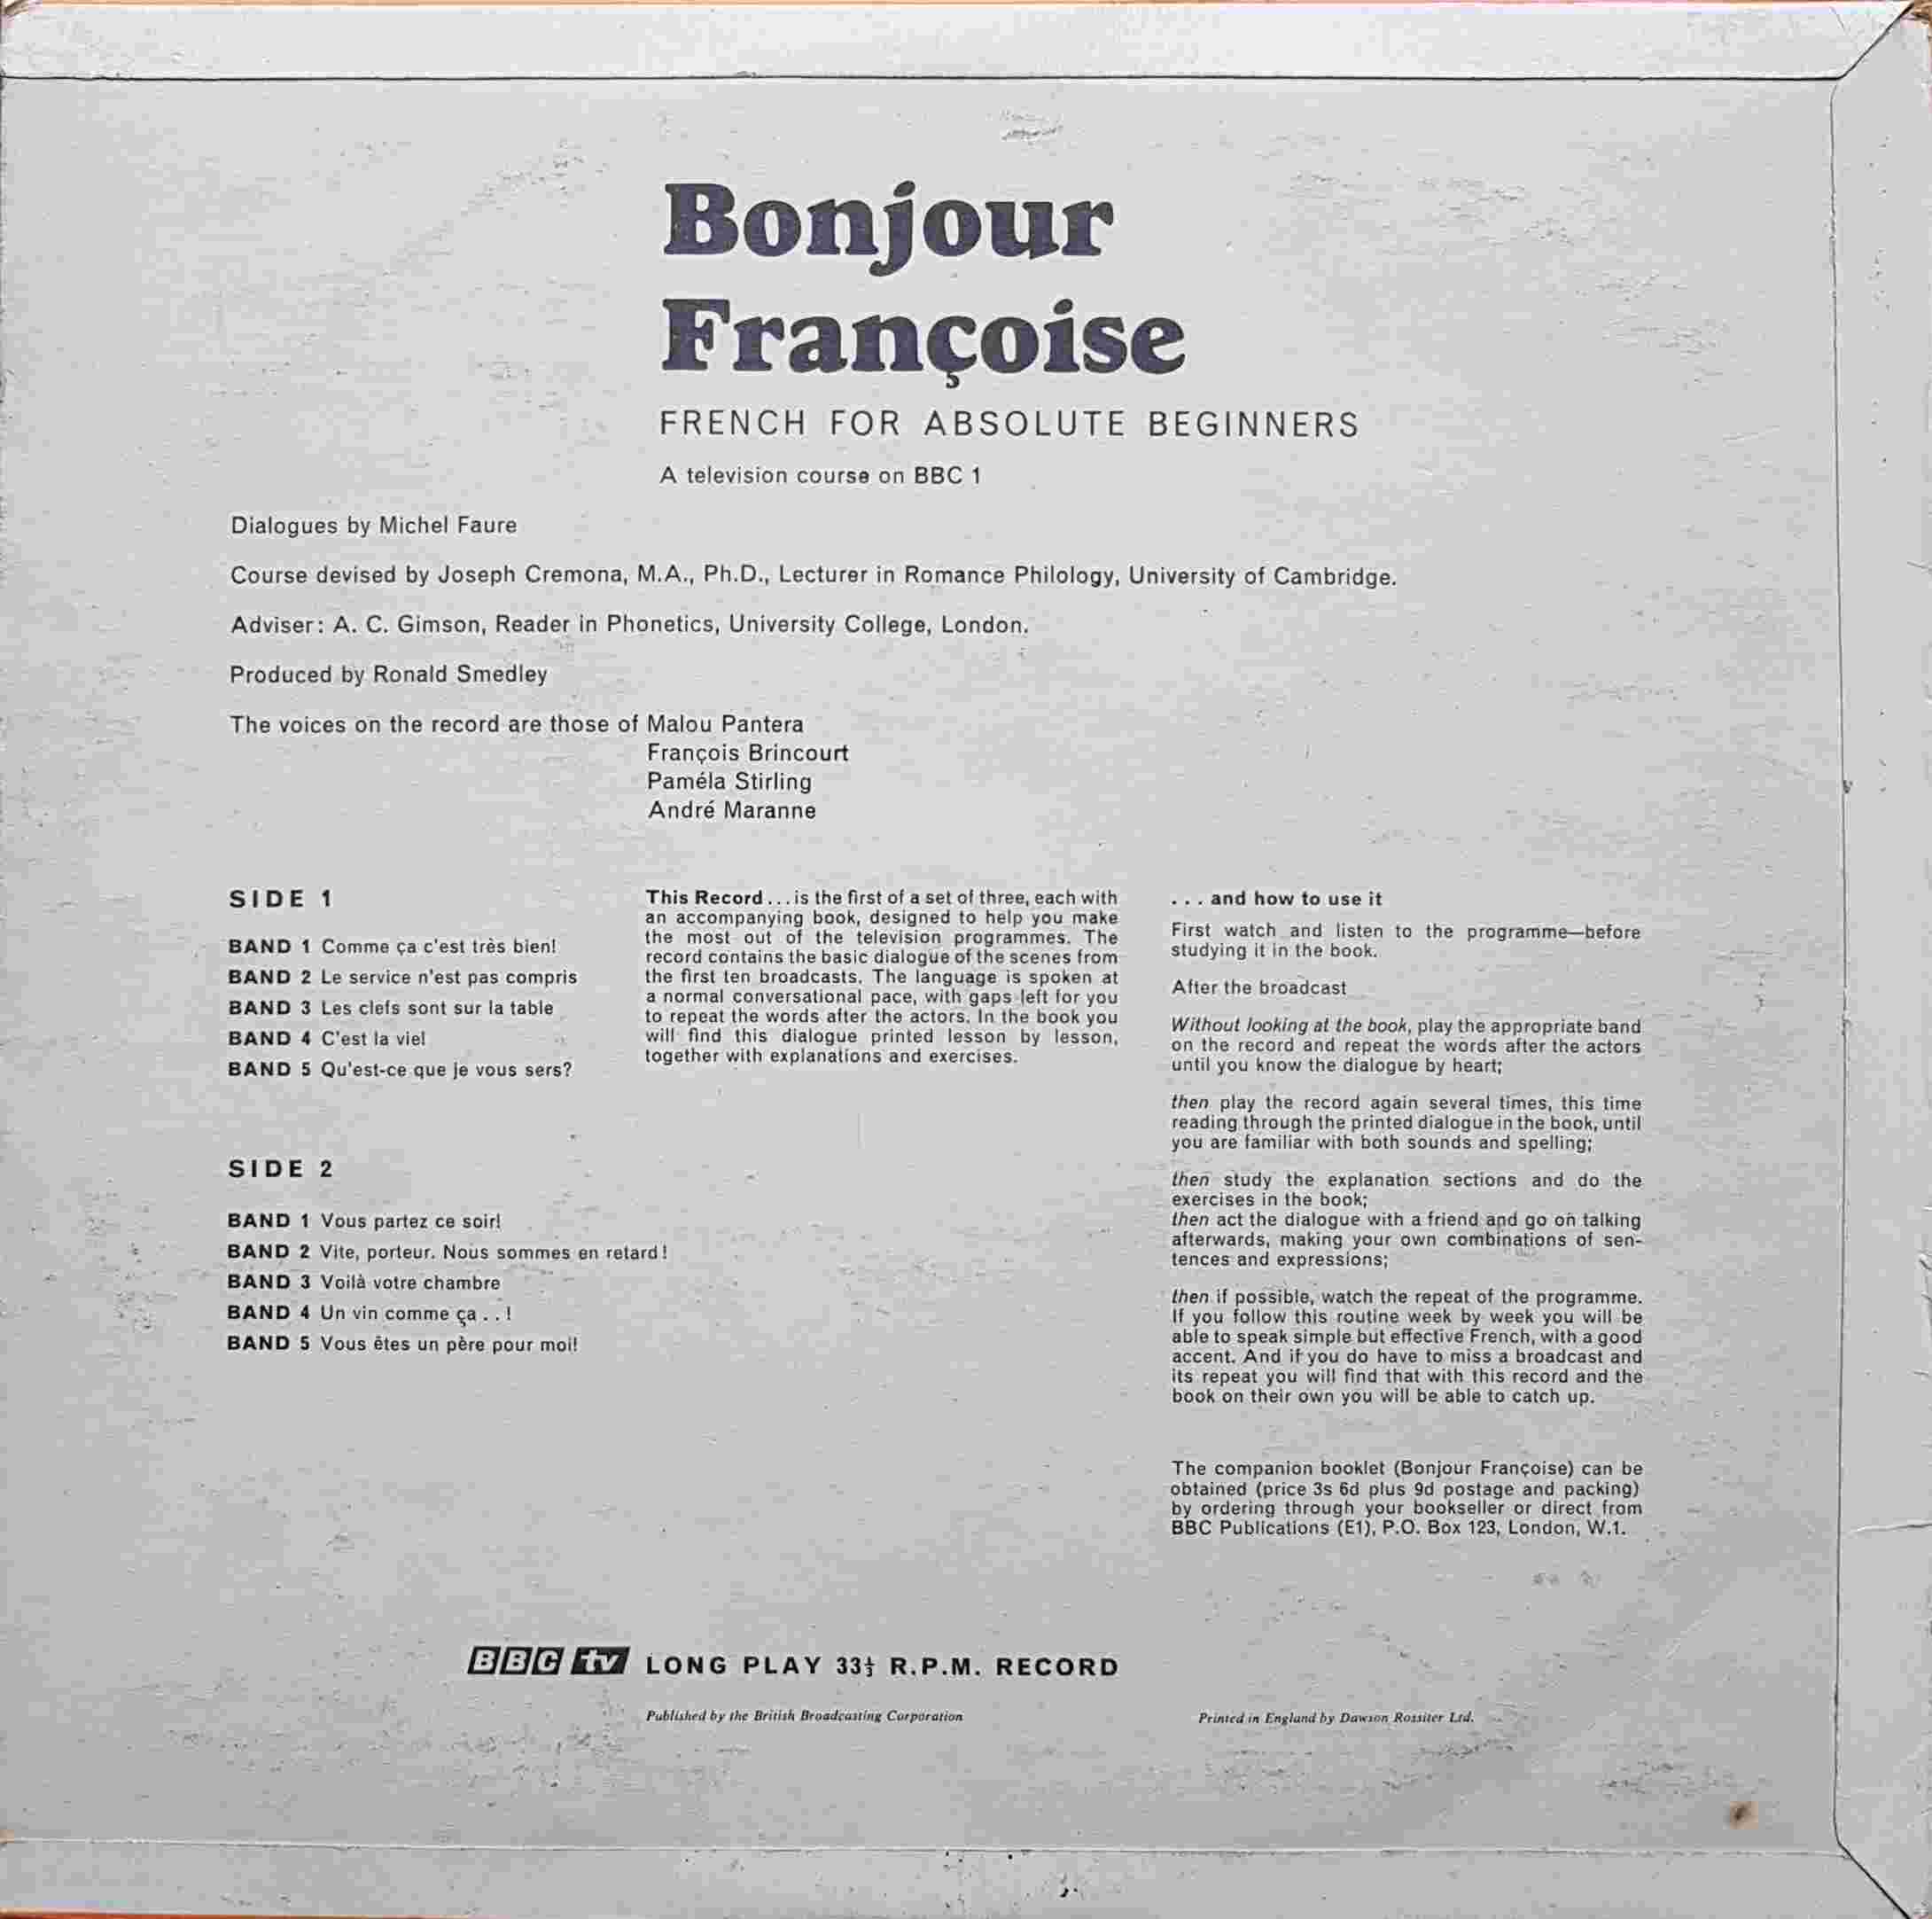 Picture of OP 41/42 Bonjour francoise - French for absolute beginners - Lessons 1 - 10 by artist Michel Faure / Joseph Cremona / A. C. Gimson from the BBC records and Tapes library